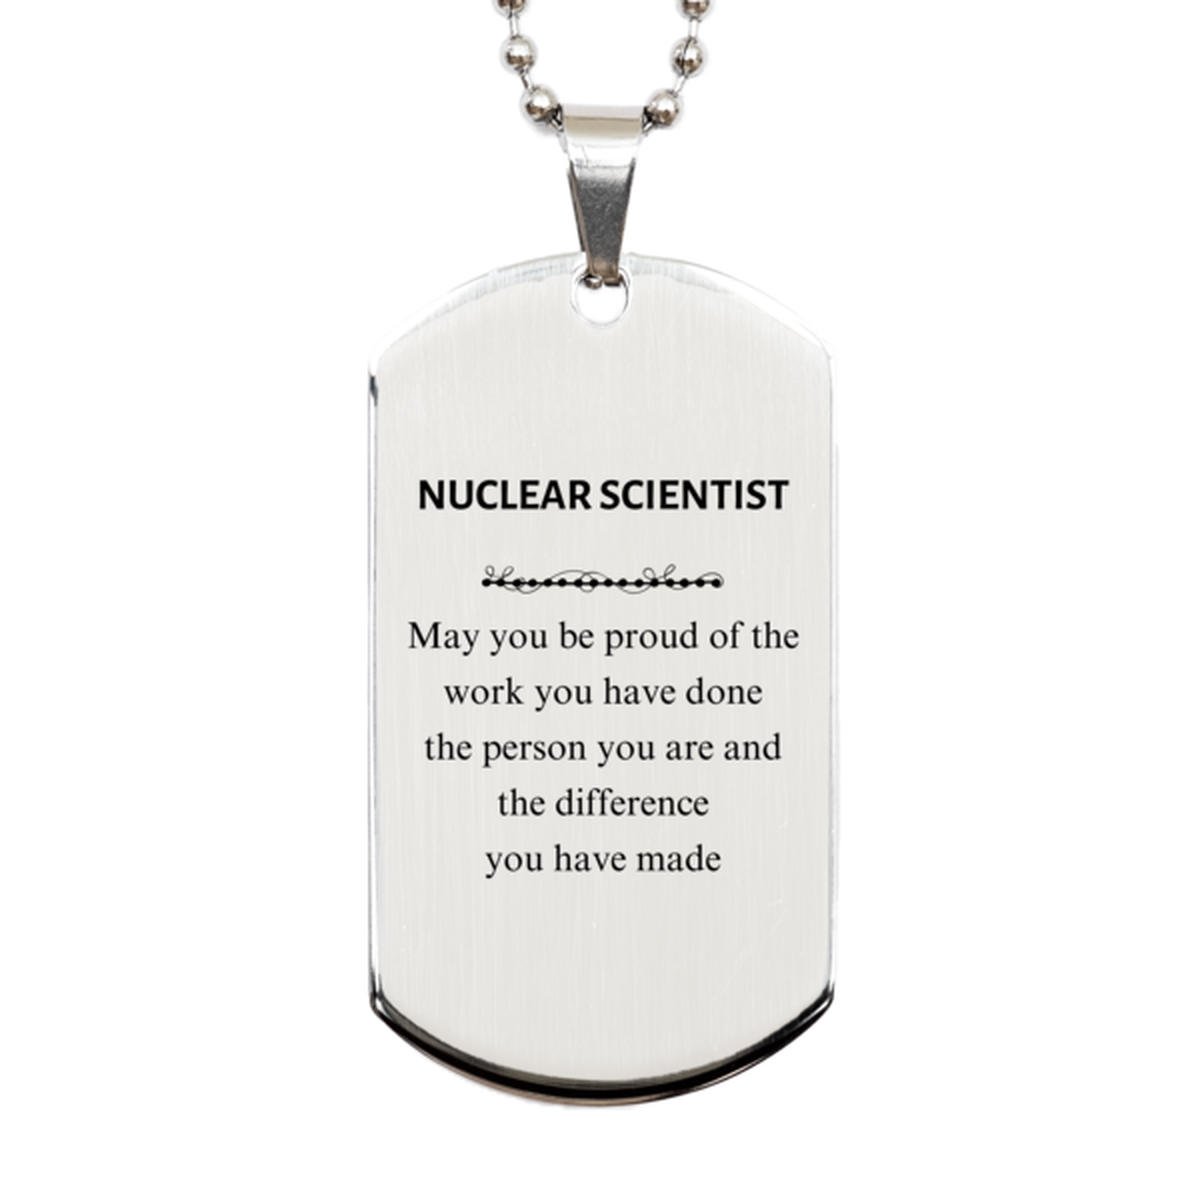 Nuclear Scientist May you be proud of the work you have done, Retirement Nuclear Scientist Silver Dog Tag for Colleague Appreciation Gifts Amazing for Nuclear Scientist